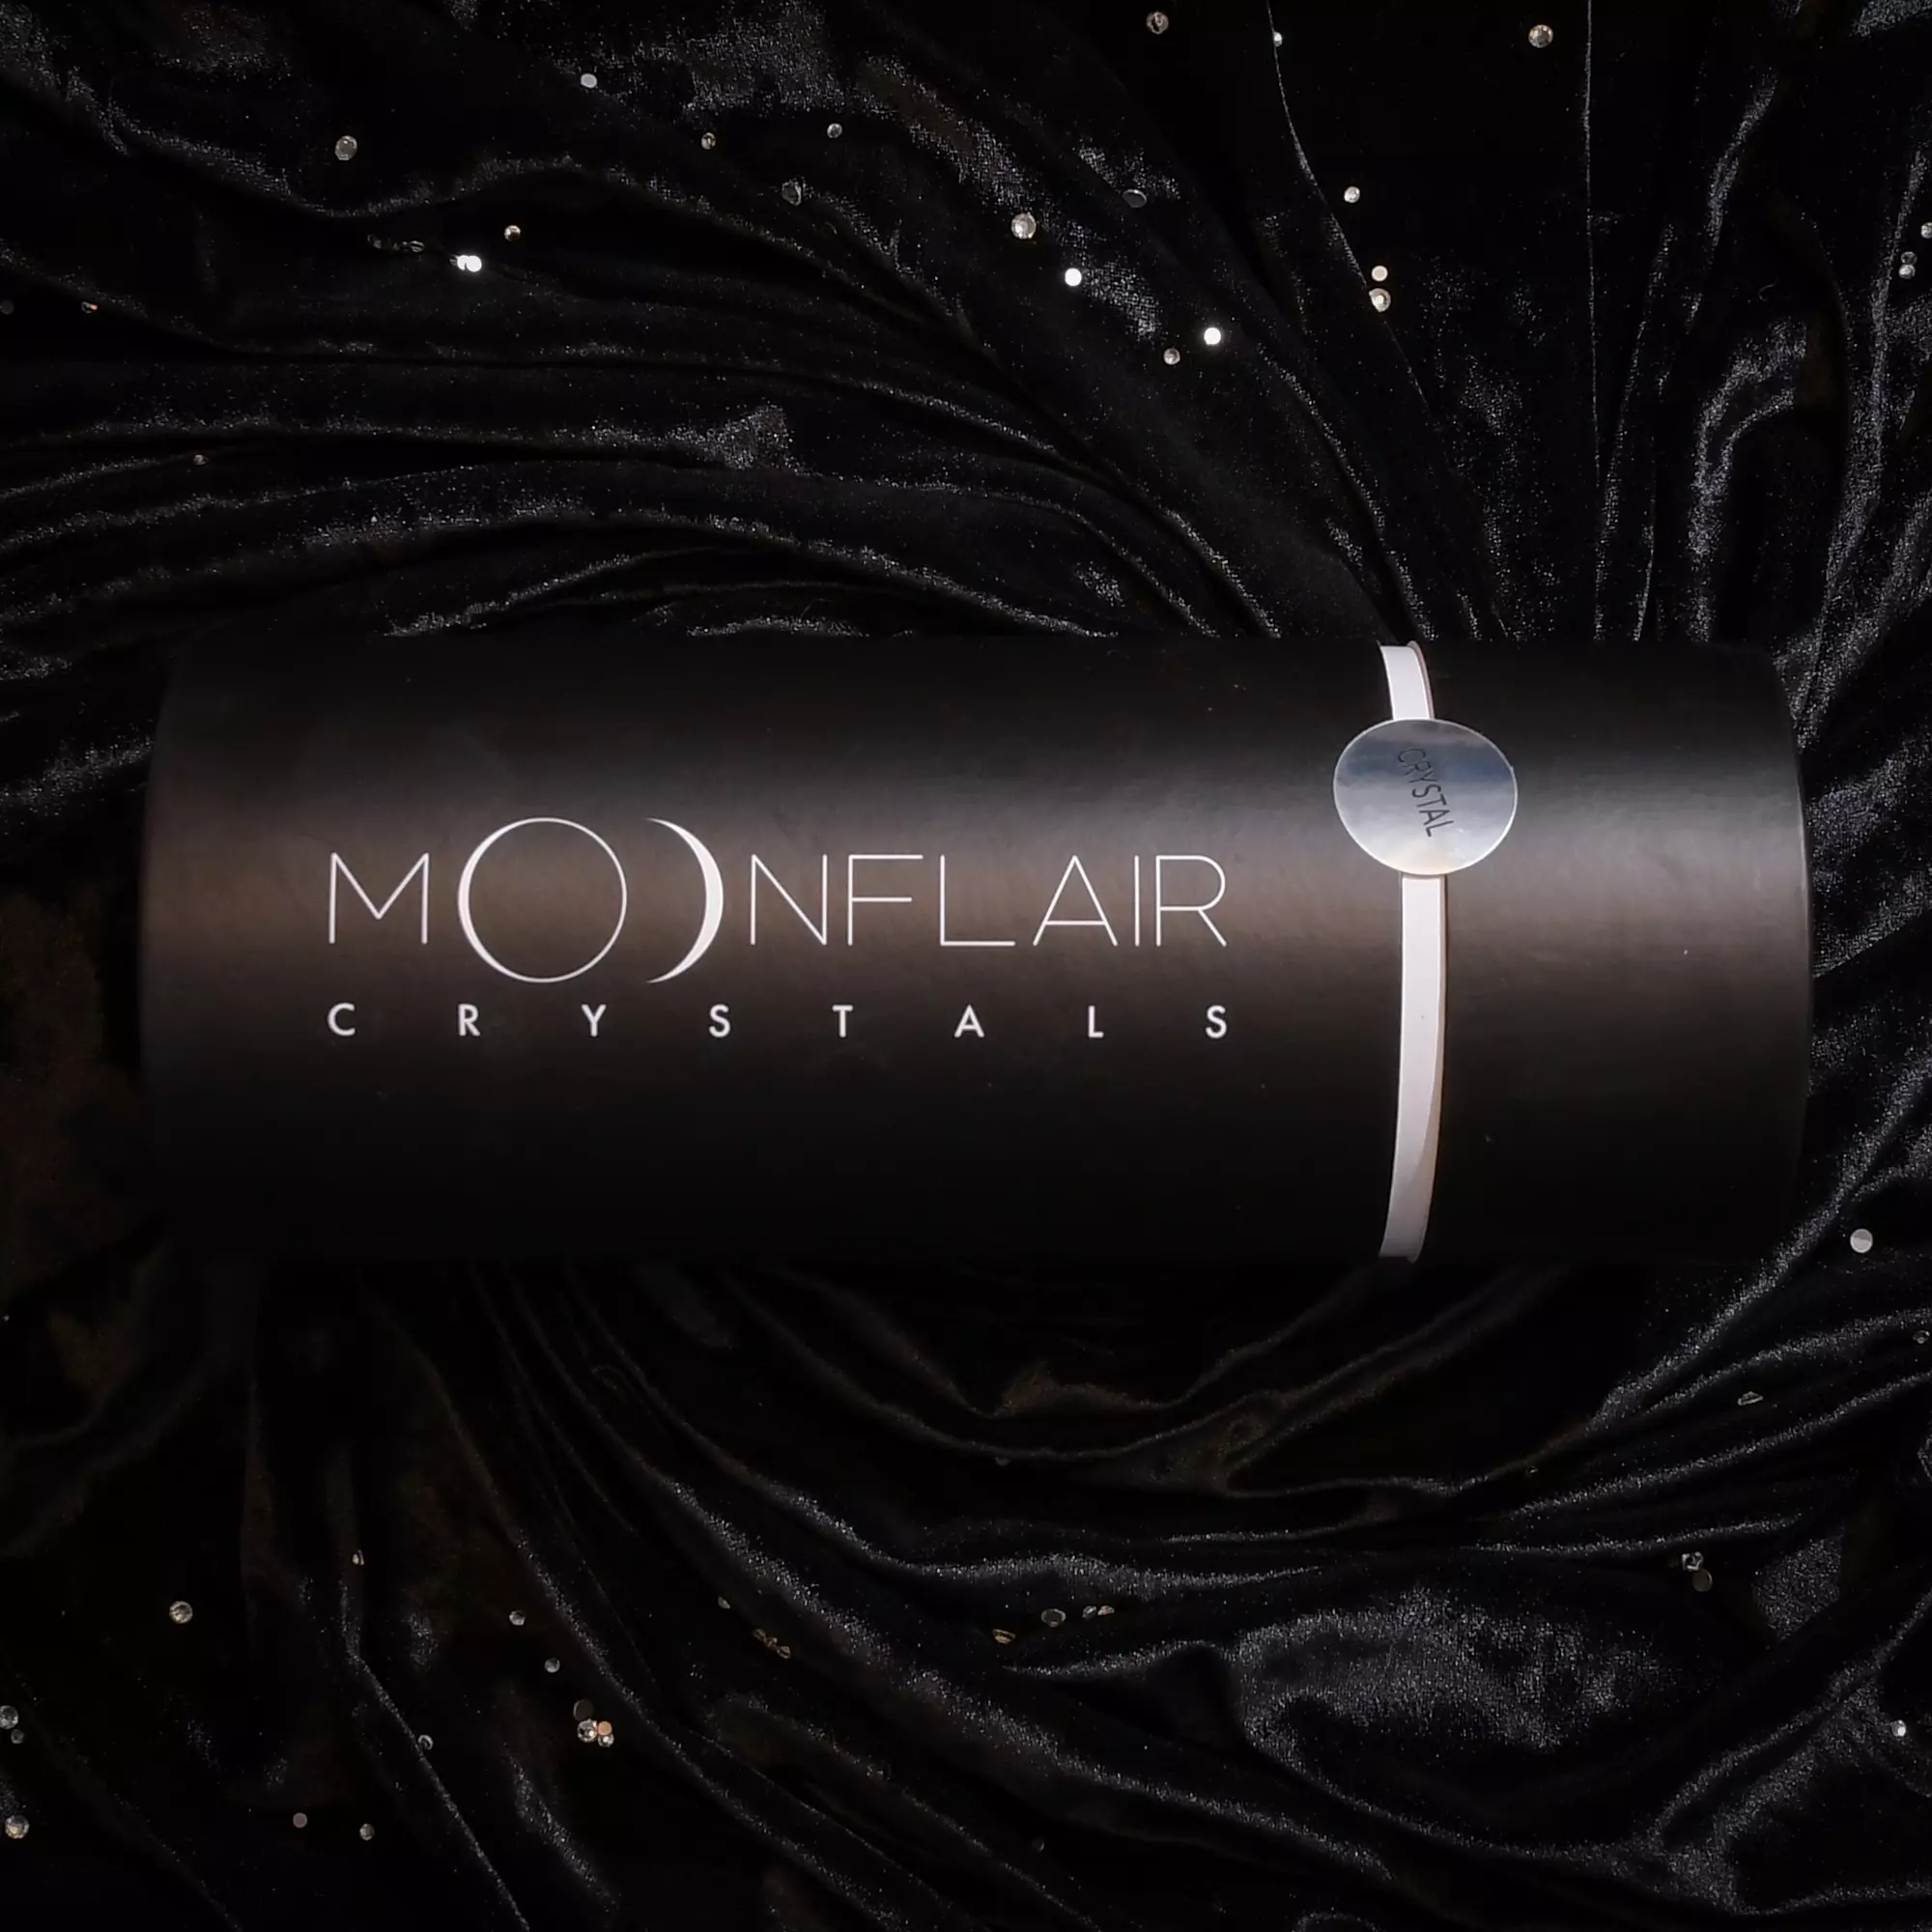 Celina Ryden's MoonFlair - Crystal Starter Kit *Signed by Celina Ryden* - Creata Beauty - Professional Beauty Products